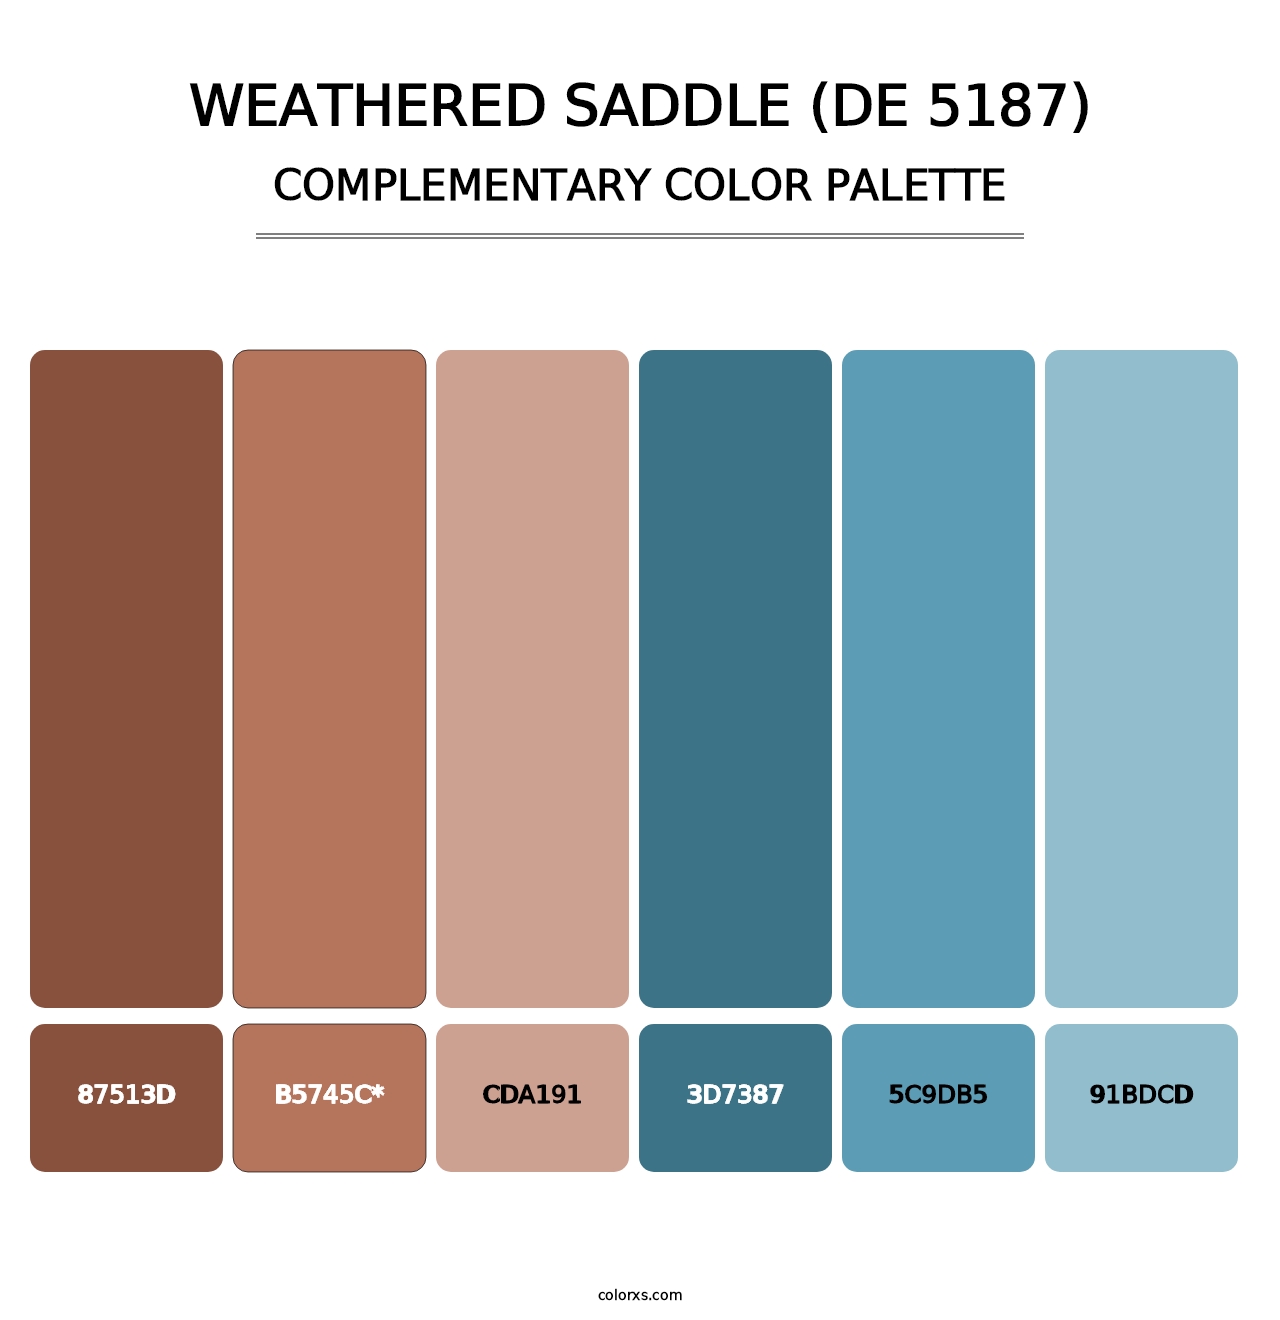 Weathered Saddle (DE 5187) - Complementary Color Palette